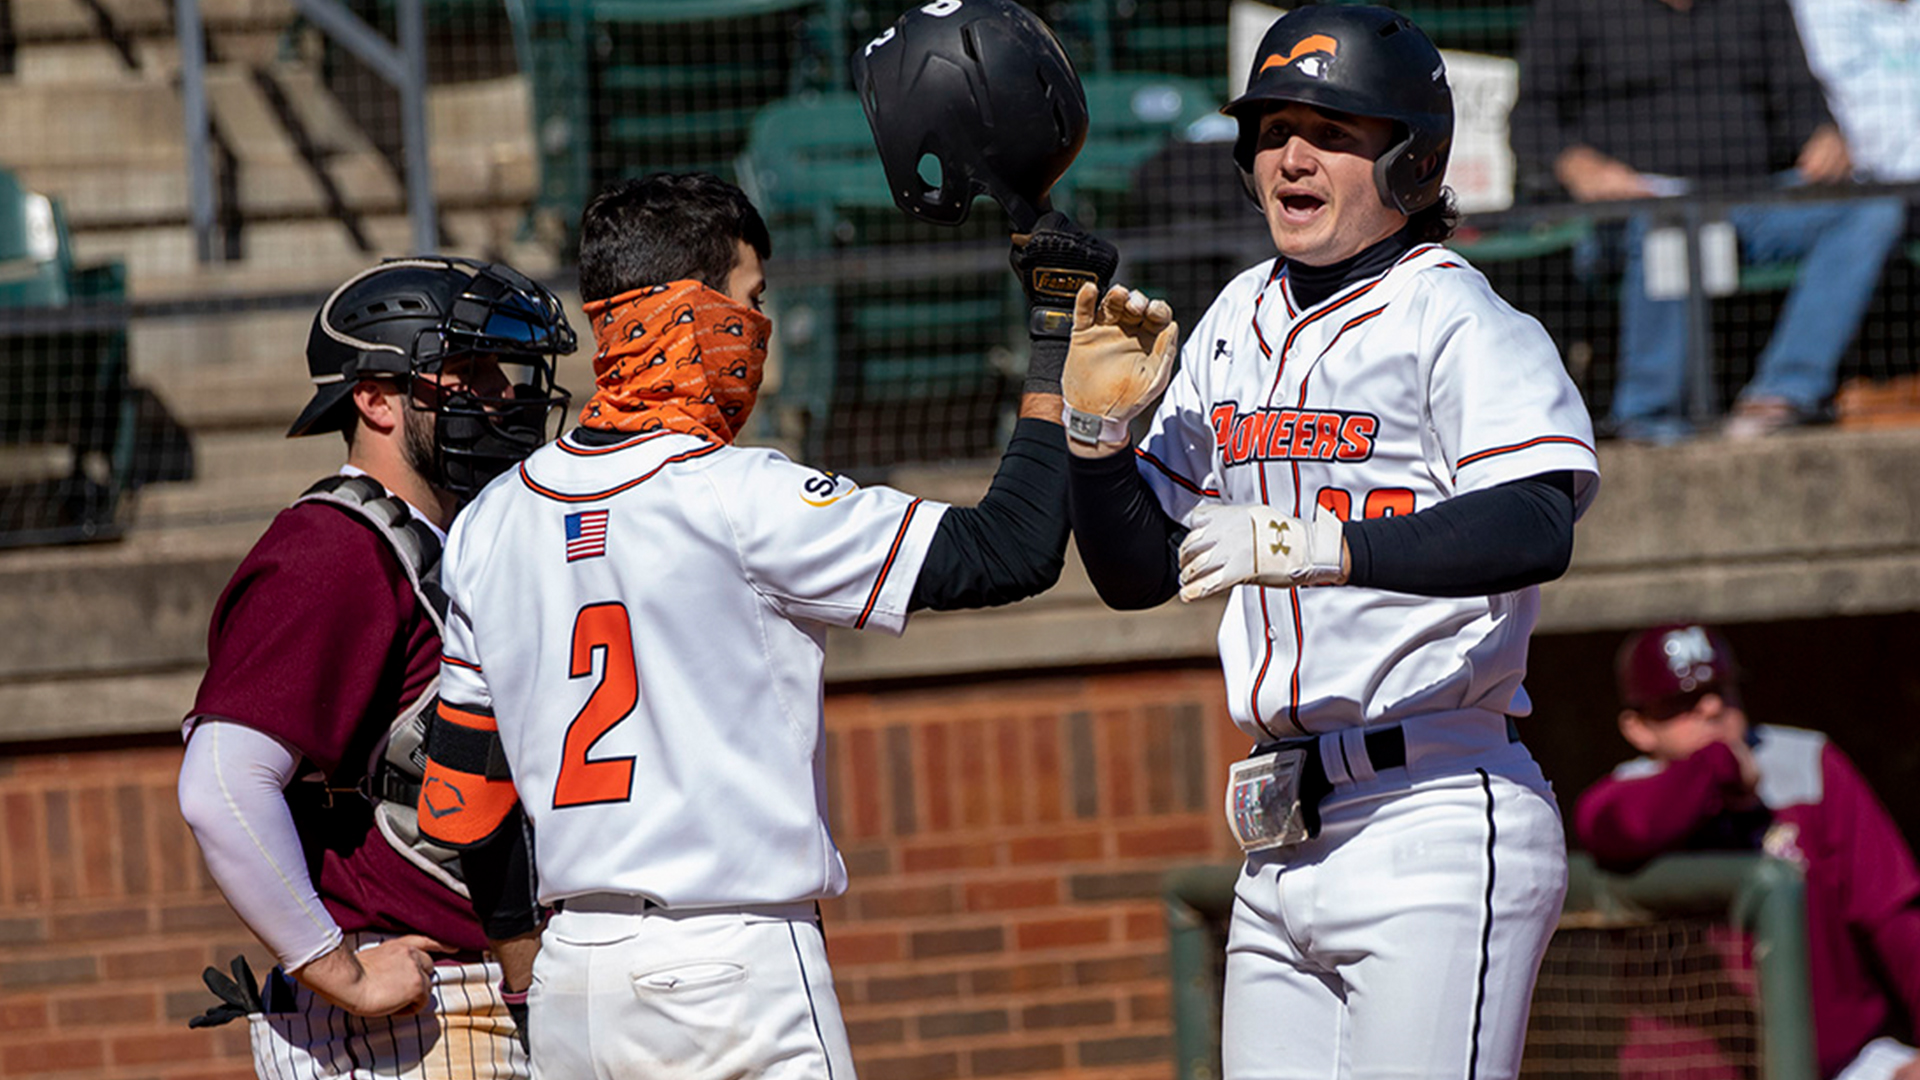 Tusculum downs No. 29 Molloy 11-3 to complete weekend sweep